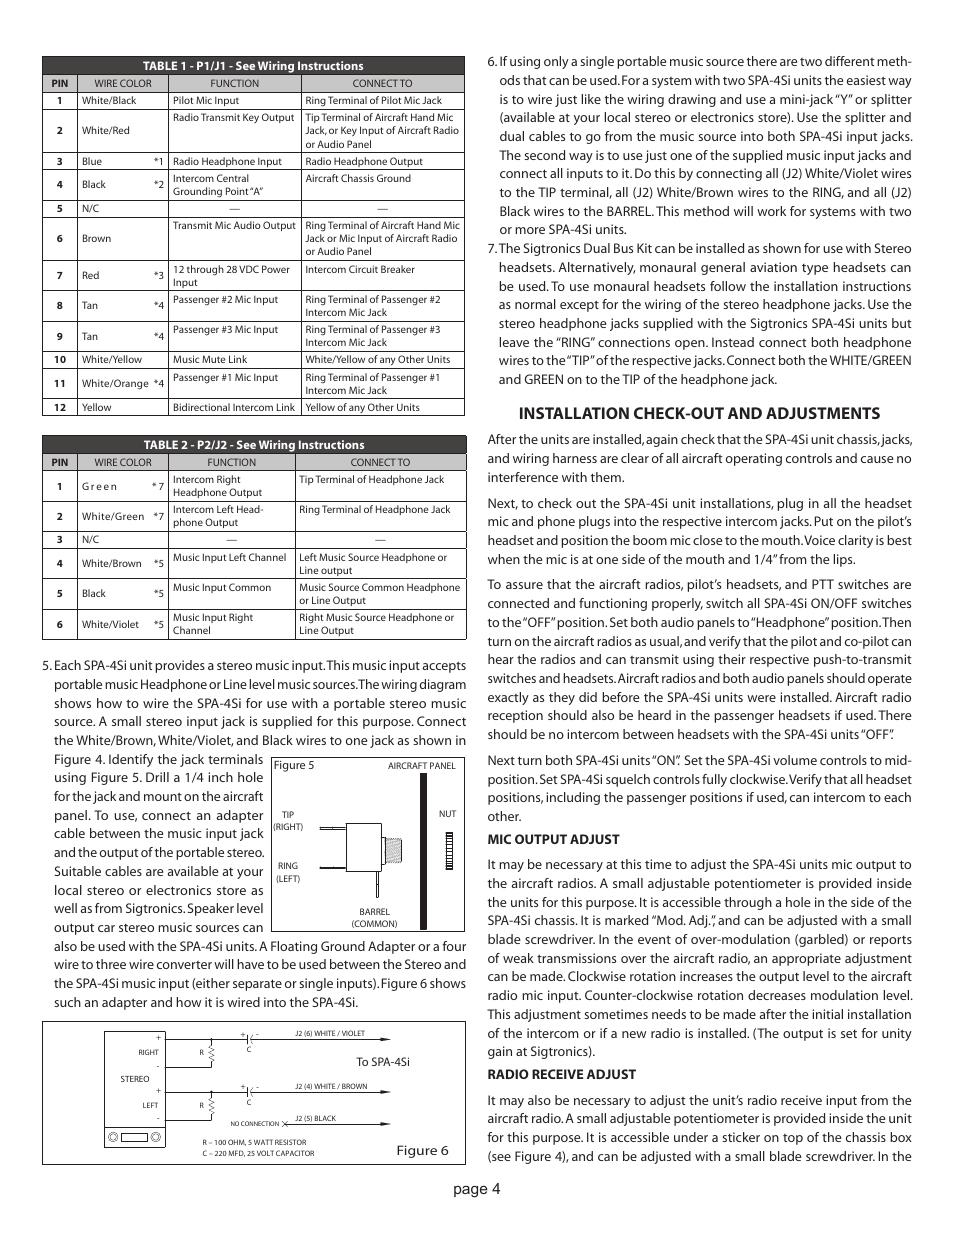 Installation check-out and adjustments, Page 4 | Sigtronics SPA-4Si User Manual | Page 4 / 6